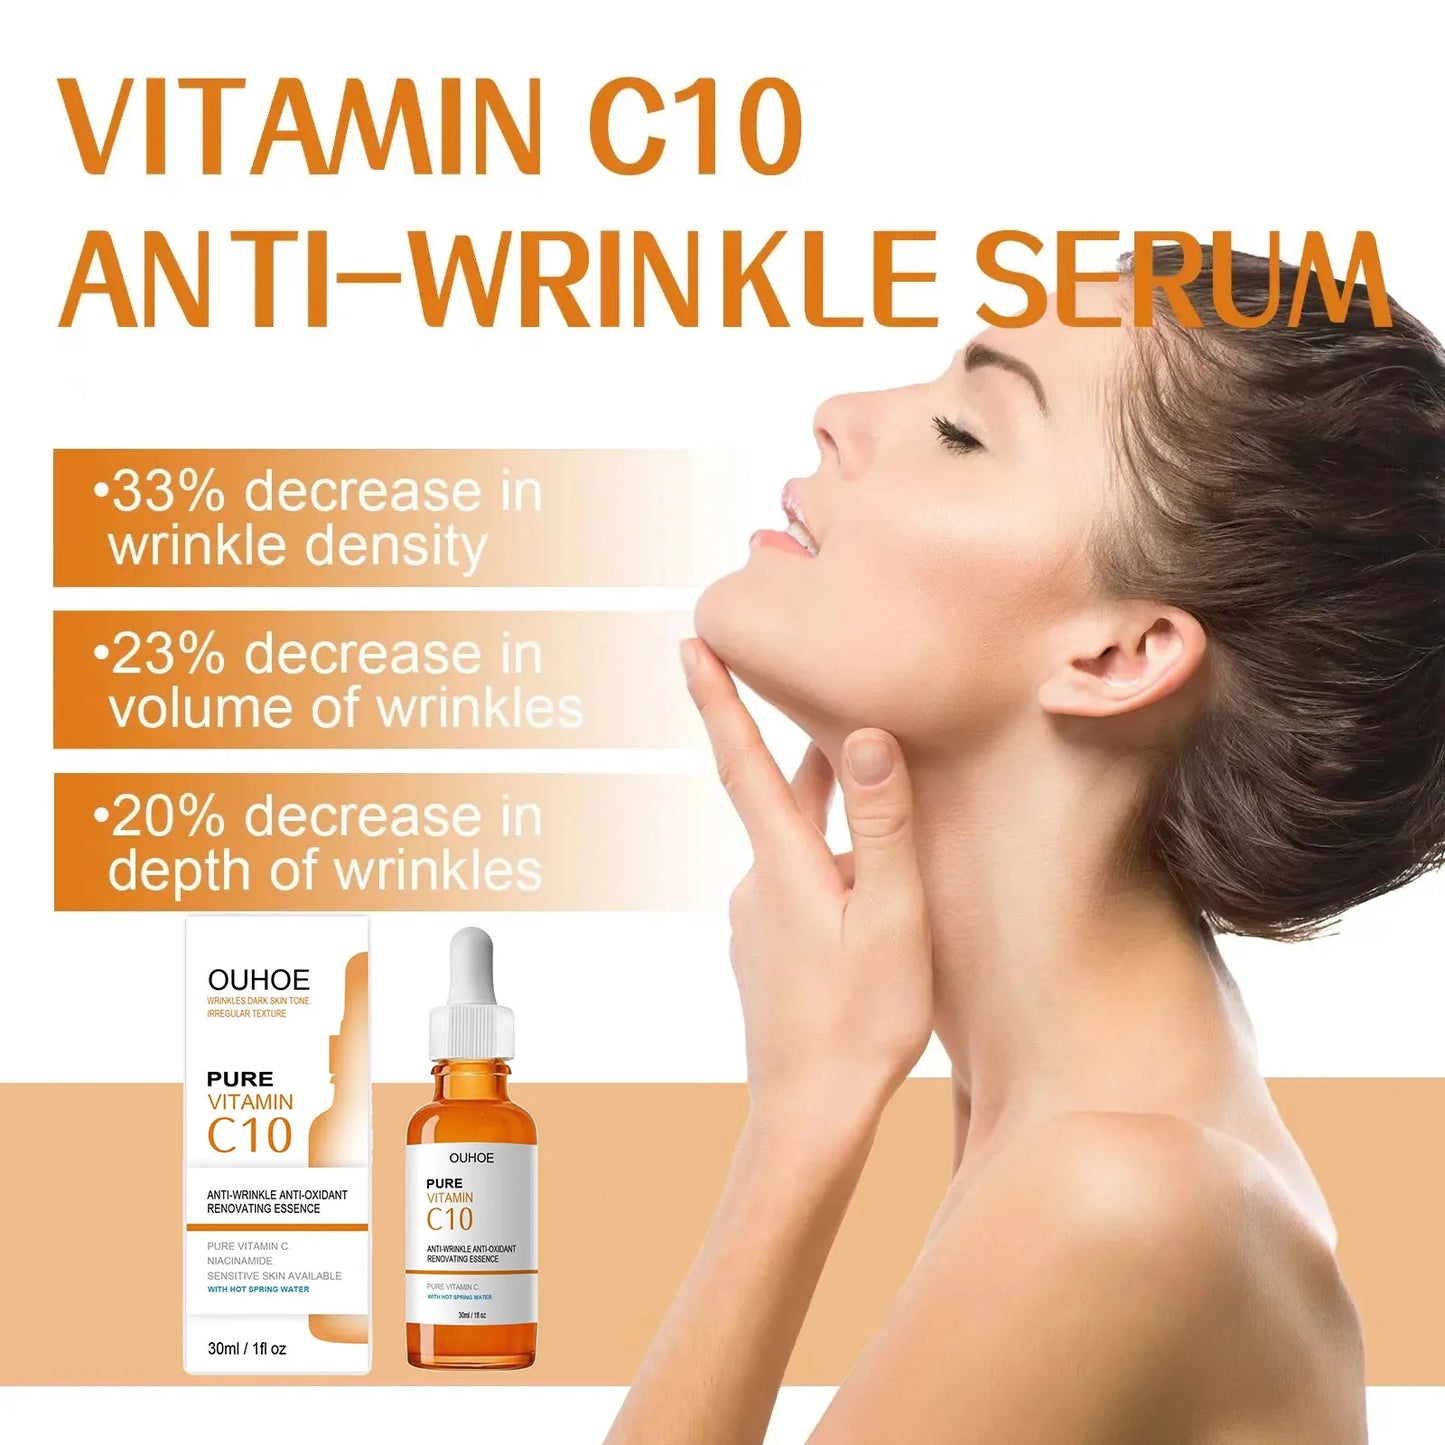 Vitamin C Wrinkle Remover Face Serum Lifting Firming Fade Fine Lines Anti-aging Essence Whitening Brighten Nourish Skin Care